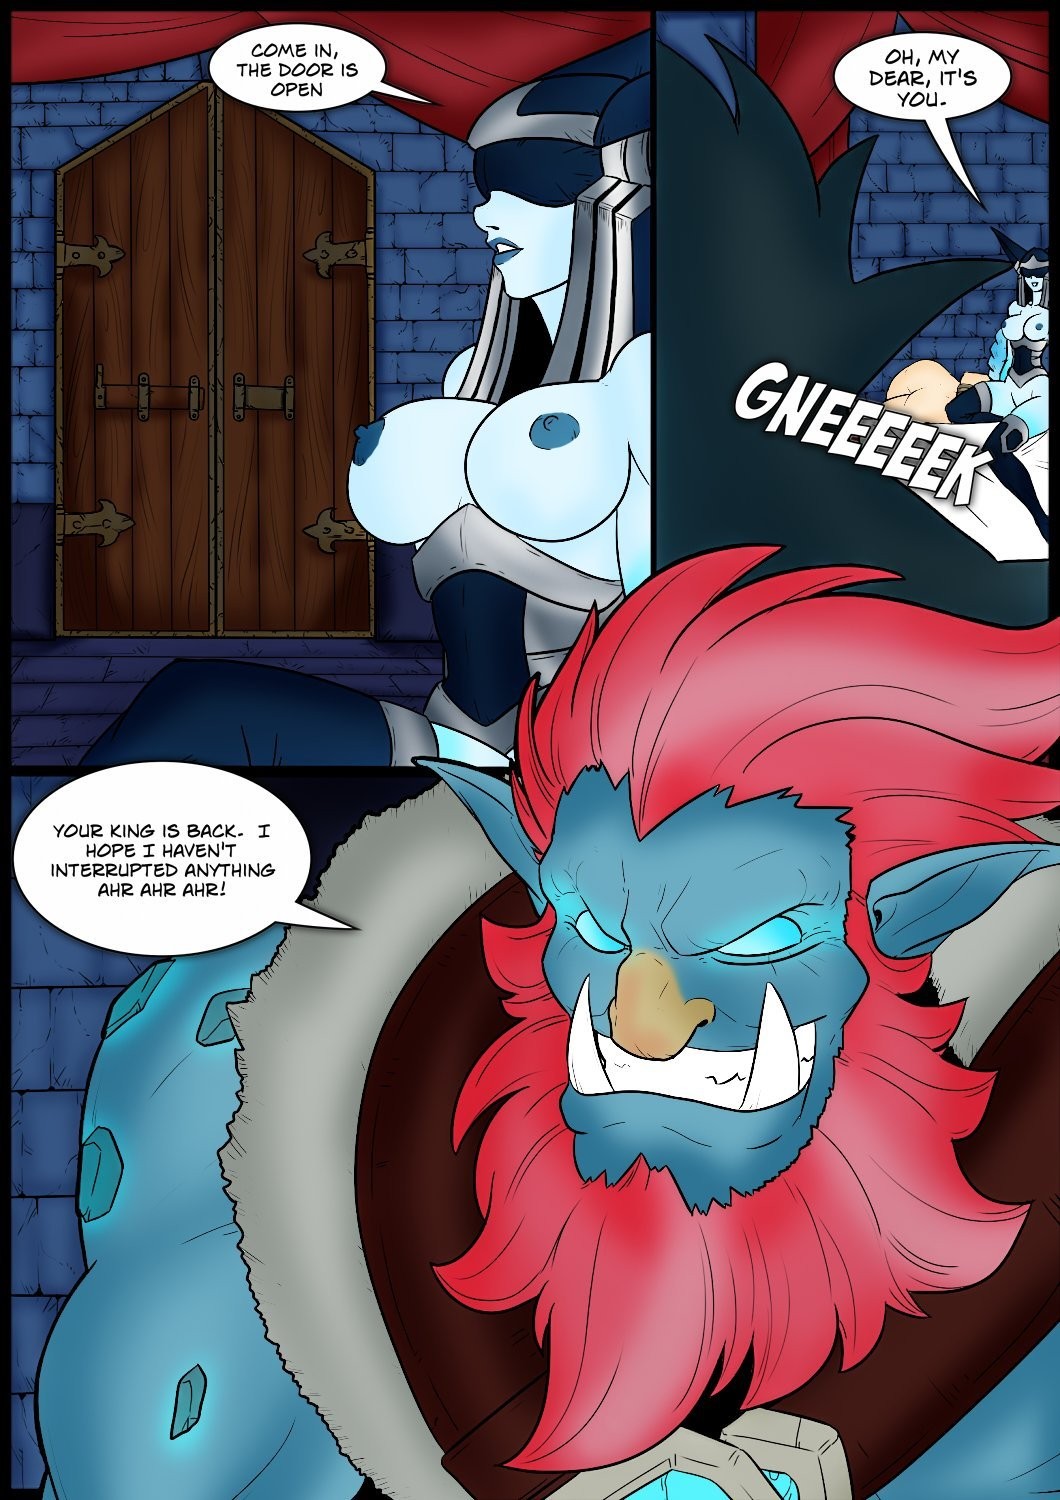 Tales of the Troll King ch. 1 - 3 ] [Colorized] porn comic picture 40